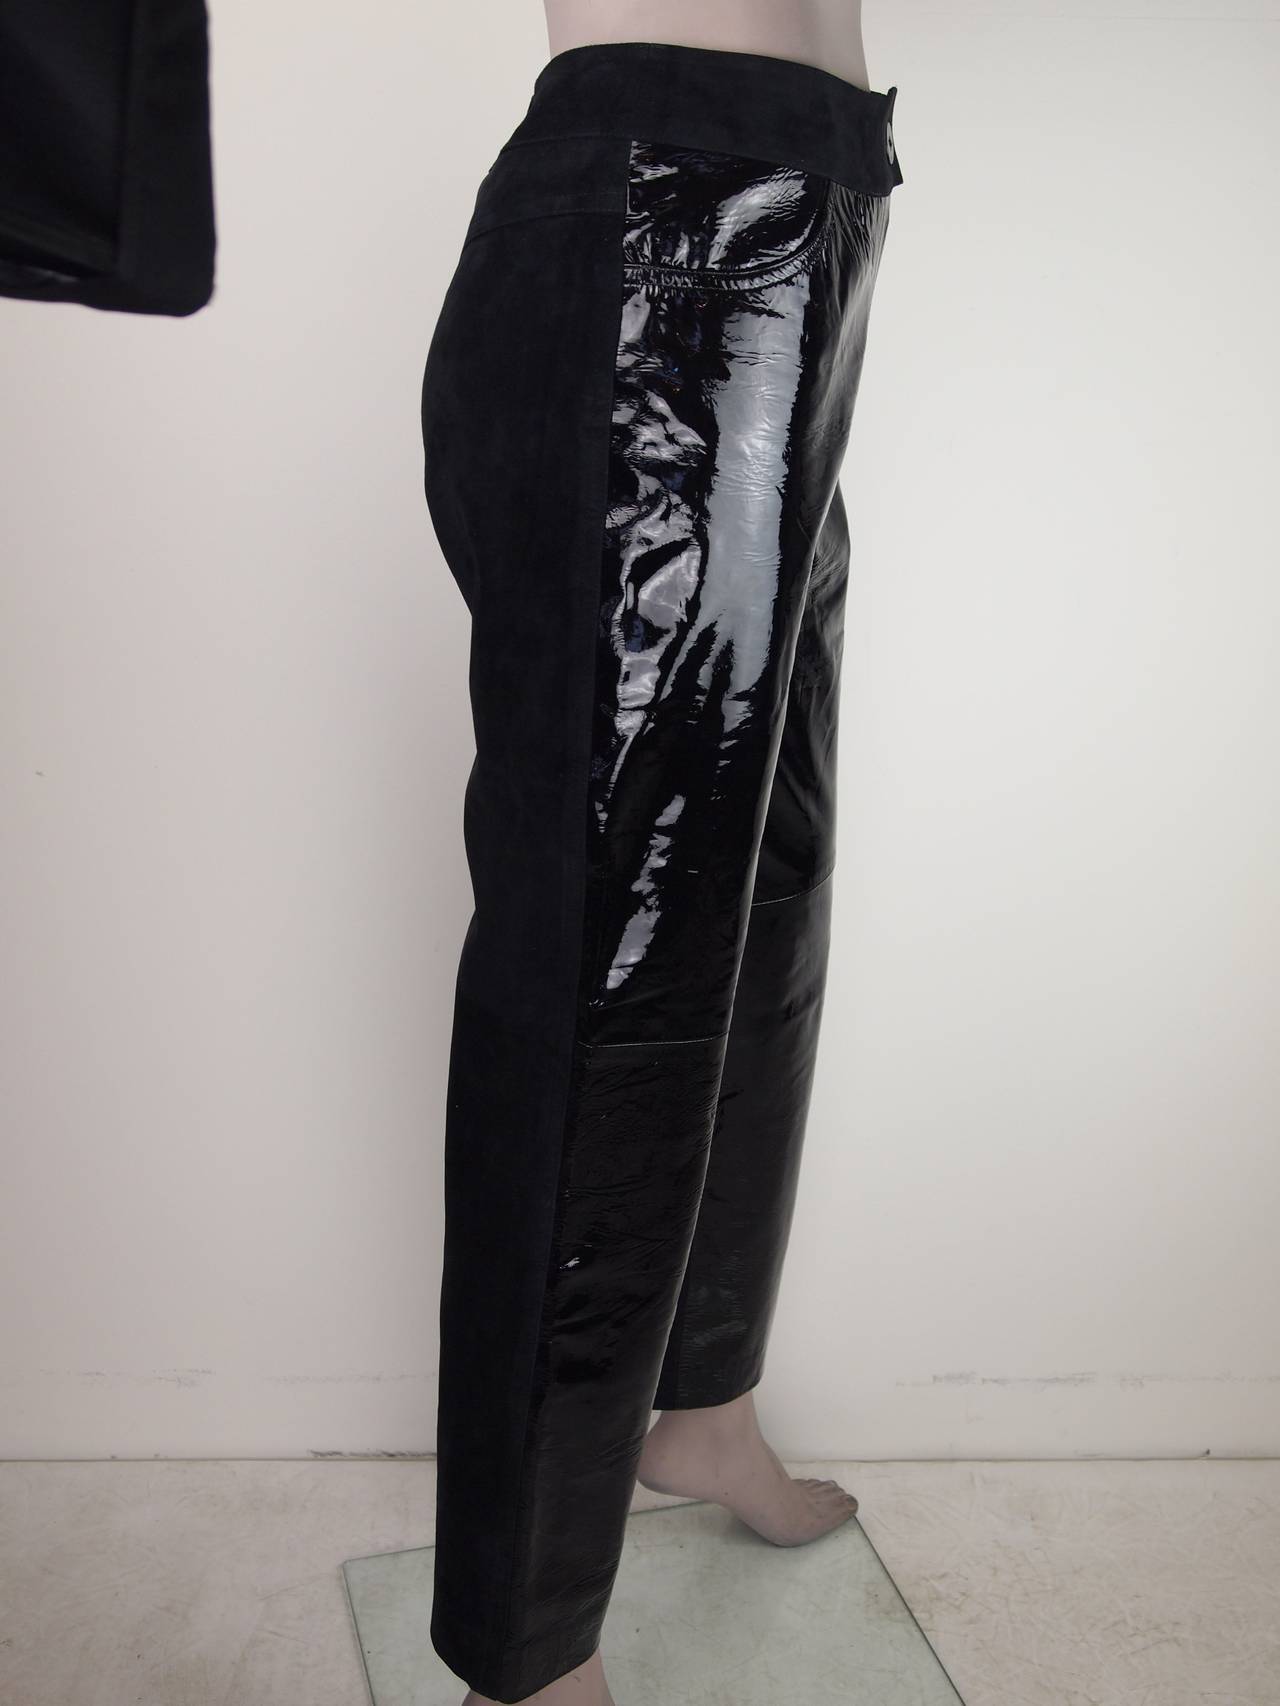 Chanel, Autumn/Winter 2001, black suede and patent leather pants with faux pocket detail at front, tonal seam accents throughout and zip closure featuring button closure at top, fully lined in silk.
Waist 28”, Hip 34”, Rise 11”, Inseam 27”, Leg